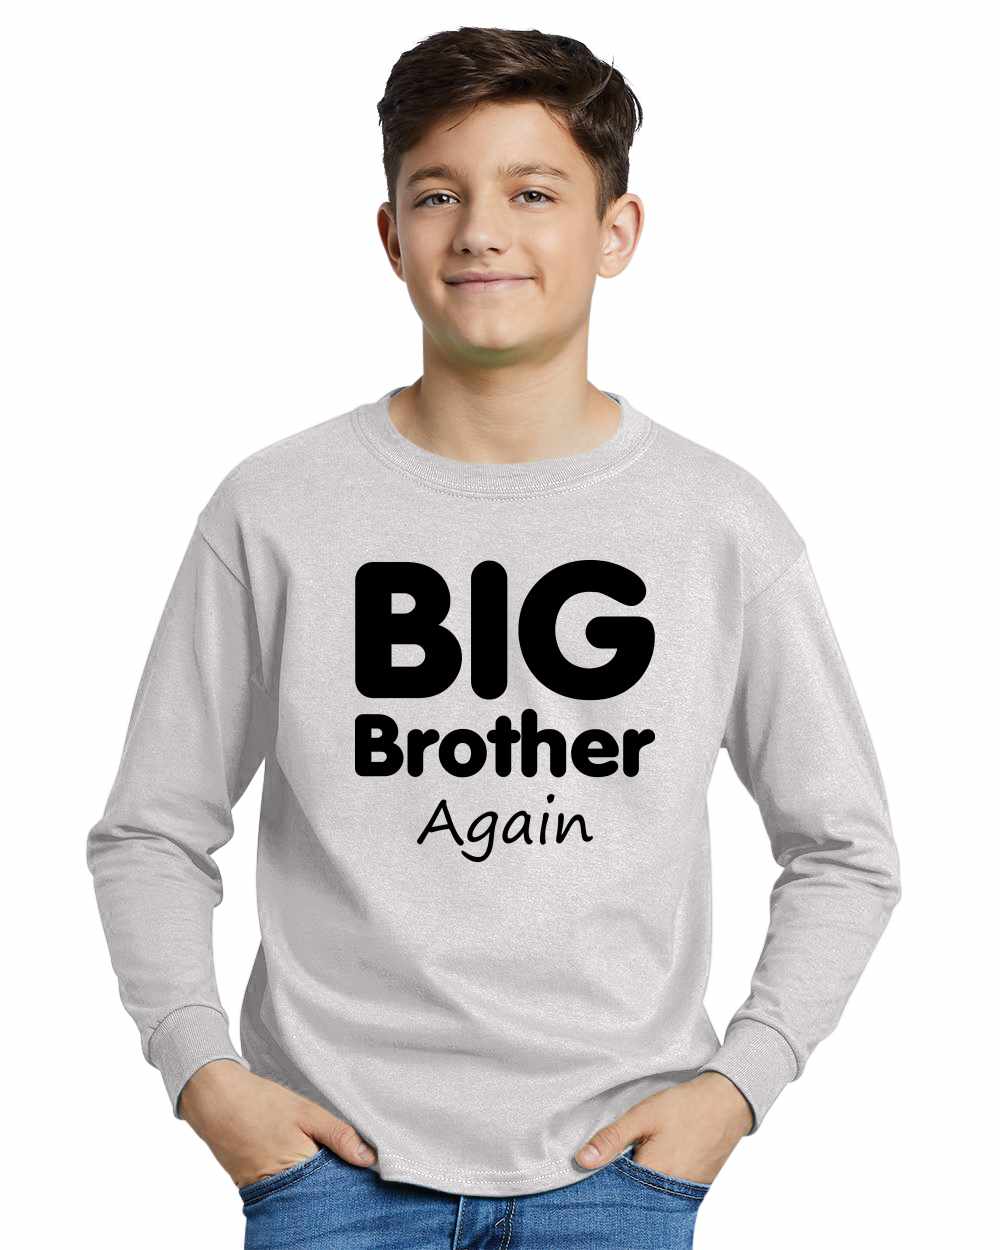 Big Brother Again on Youth Long Sleeve Shirt